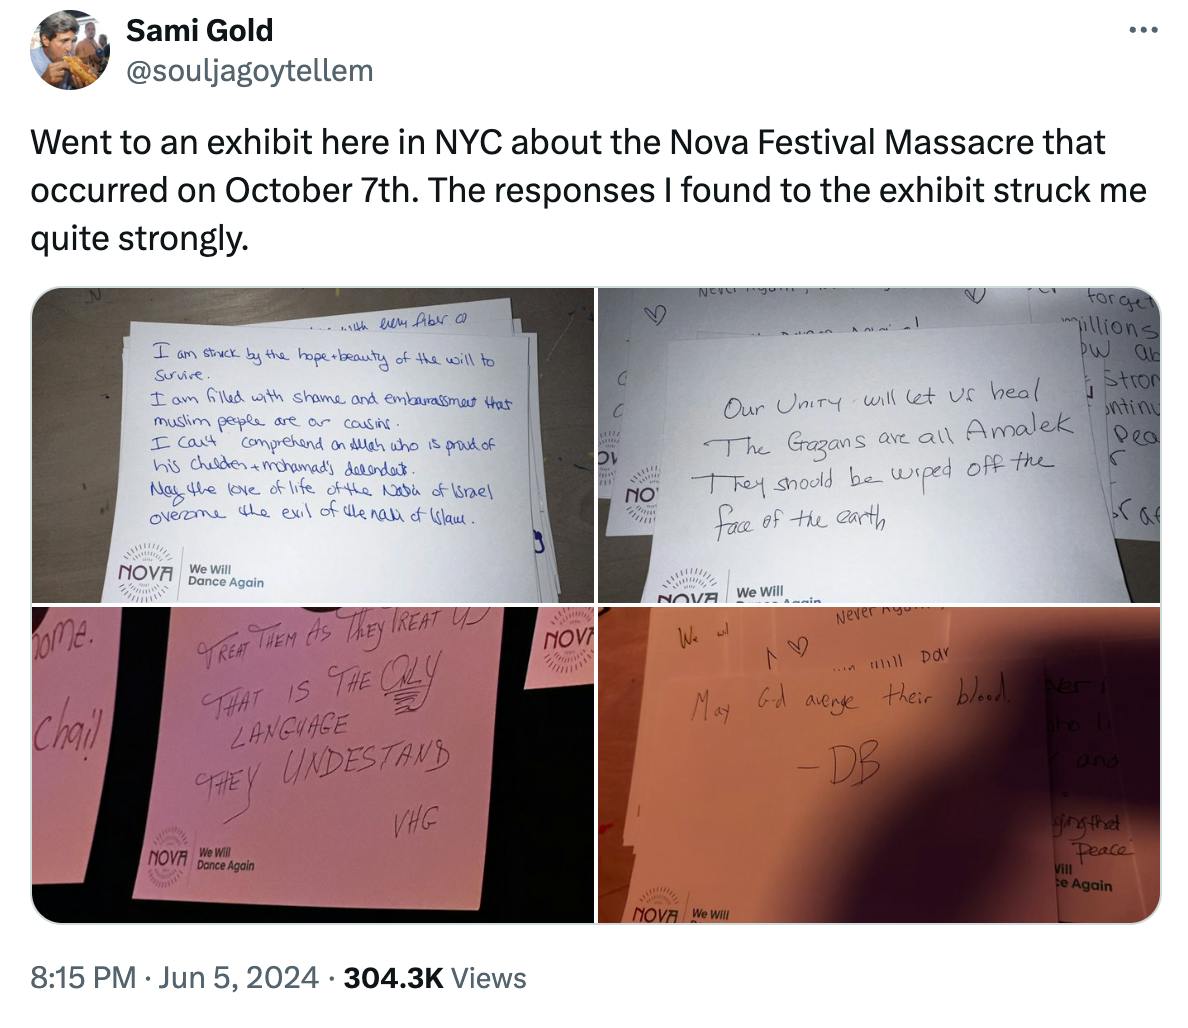 Twitter screenshot @souljagoytellem: Went to an exhibit here in NYC about the Nova Festival Massacre that occurred on October 7th. The responses I found to the exhibit struck me quite strongly. With four photos of index cards reading things like "Our Unity will let us heal The Gazans are all Amalek They should be wiped off the earth"